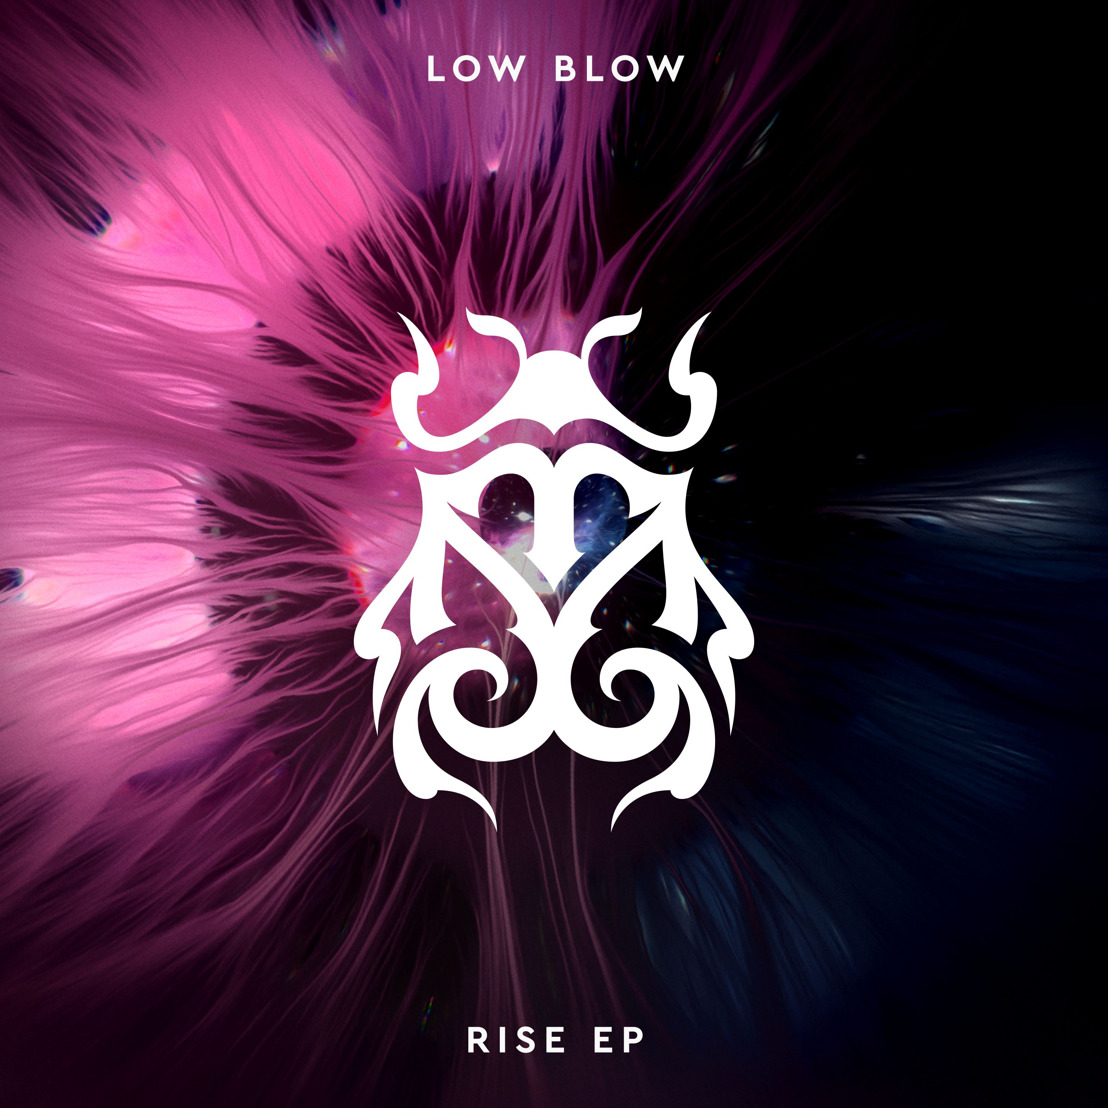 Rising star Low Blow delivers his magnificent 2-track RISE EP